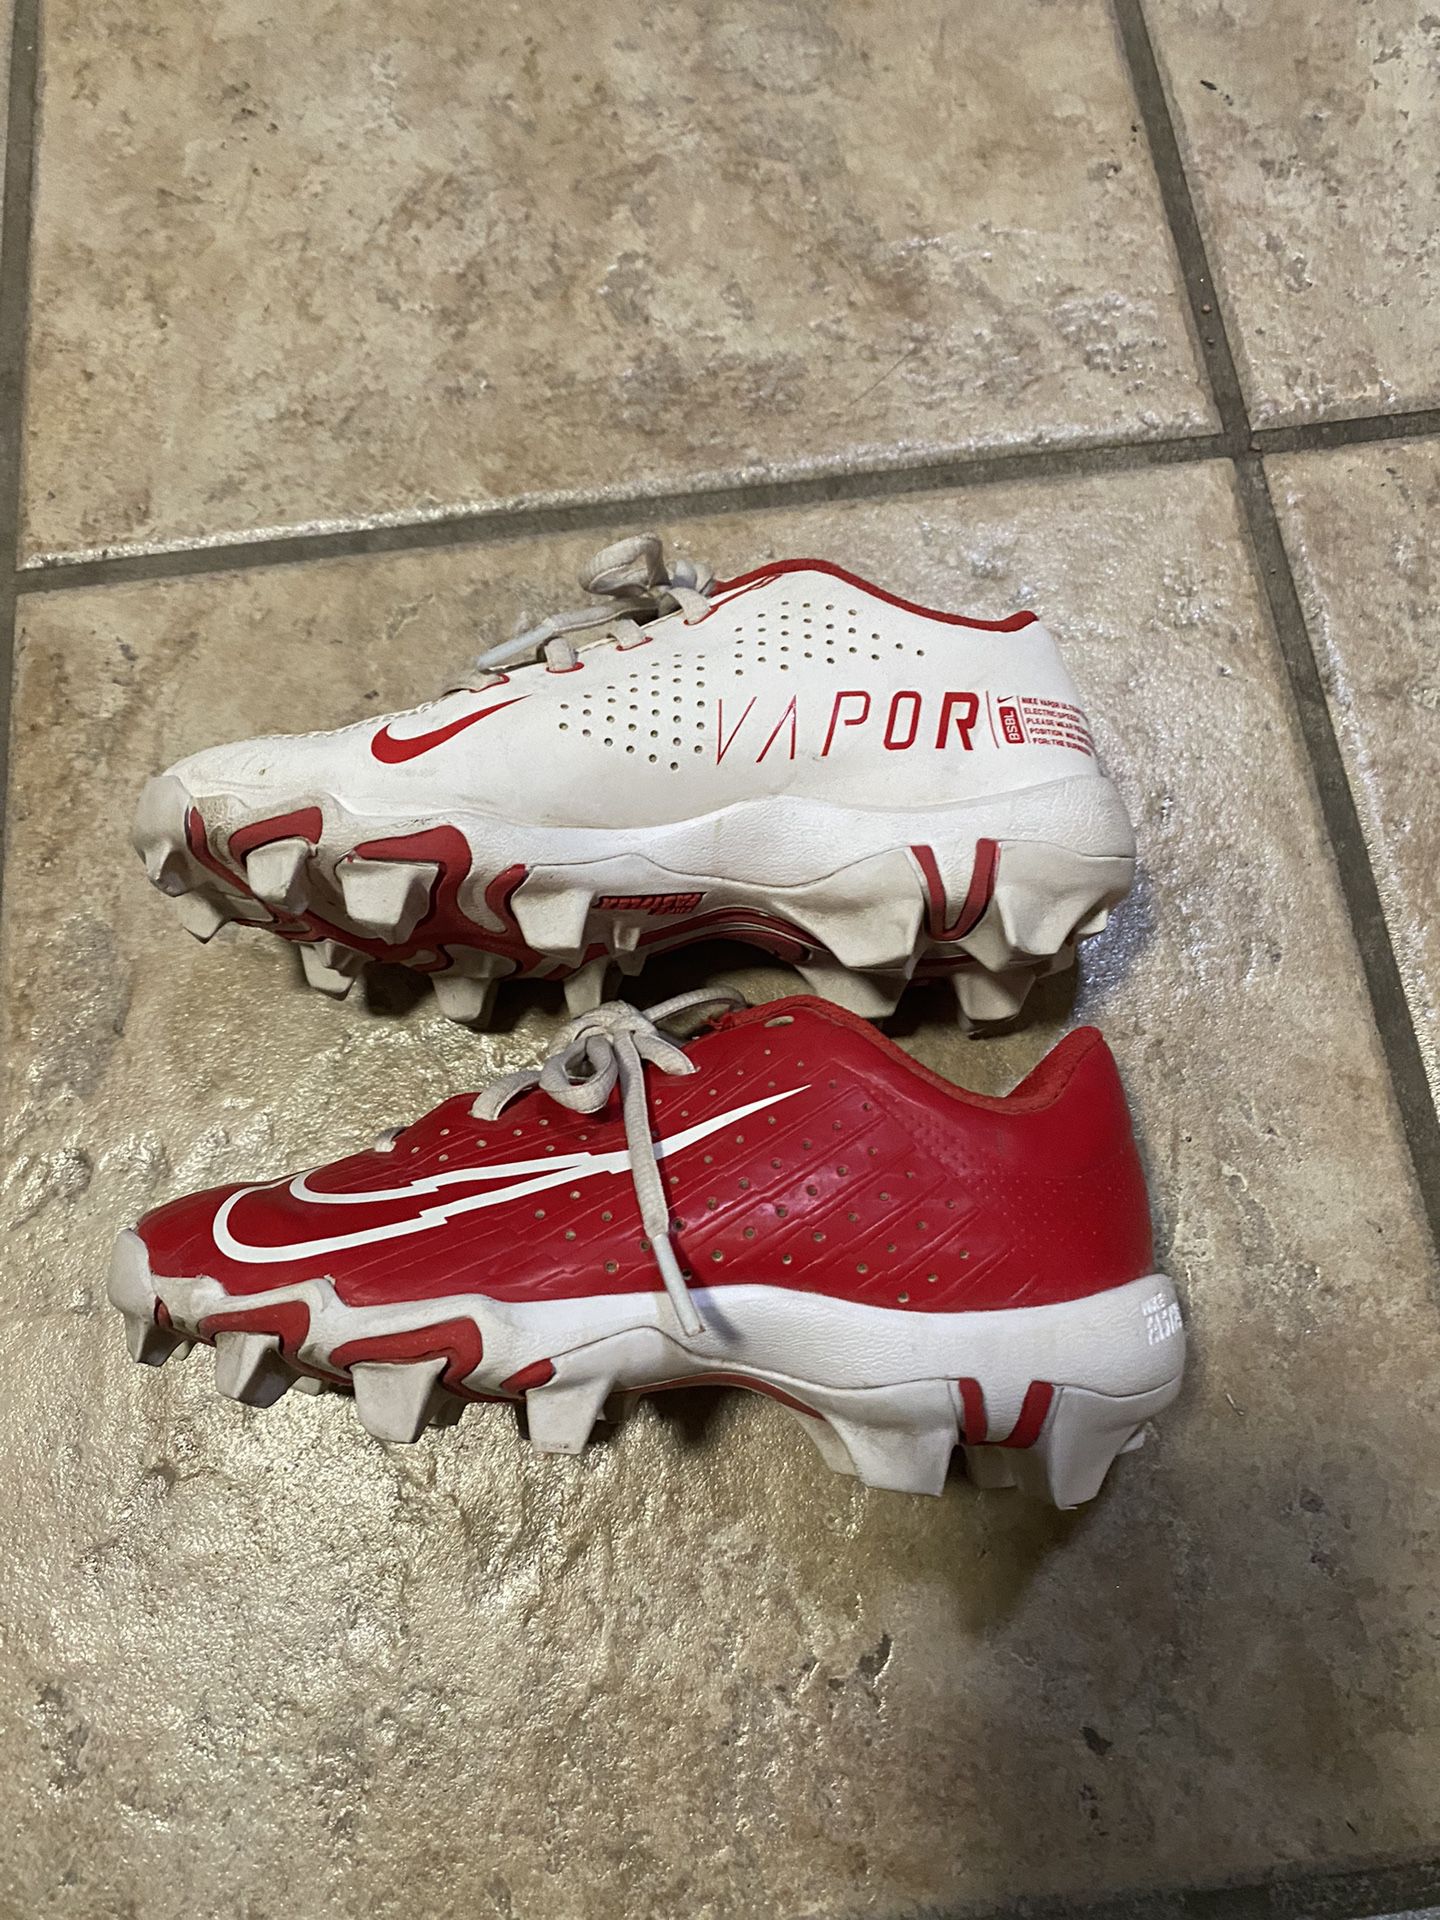 Nike Mike Trout Cleats Kids Size 13 for Sale in El Paso, TX - OfferUp